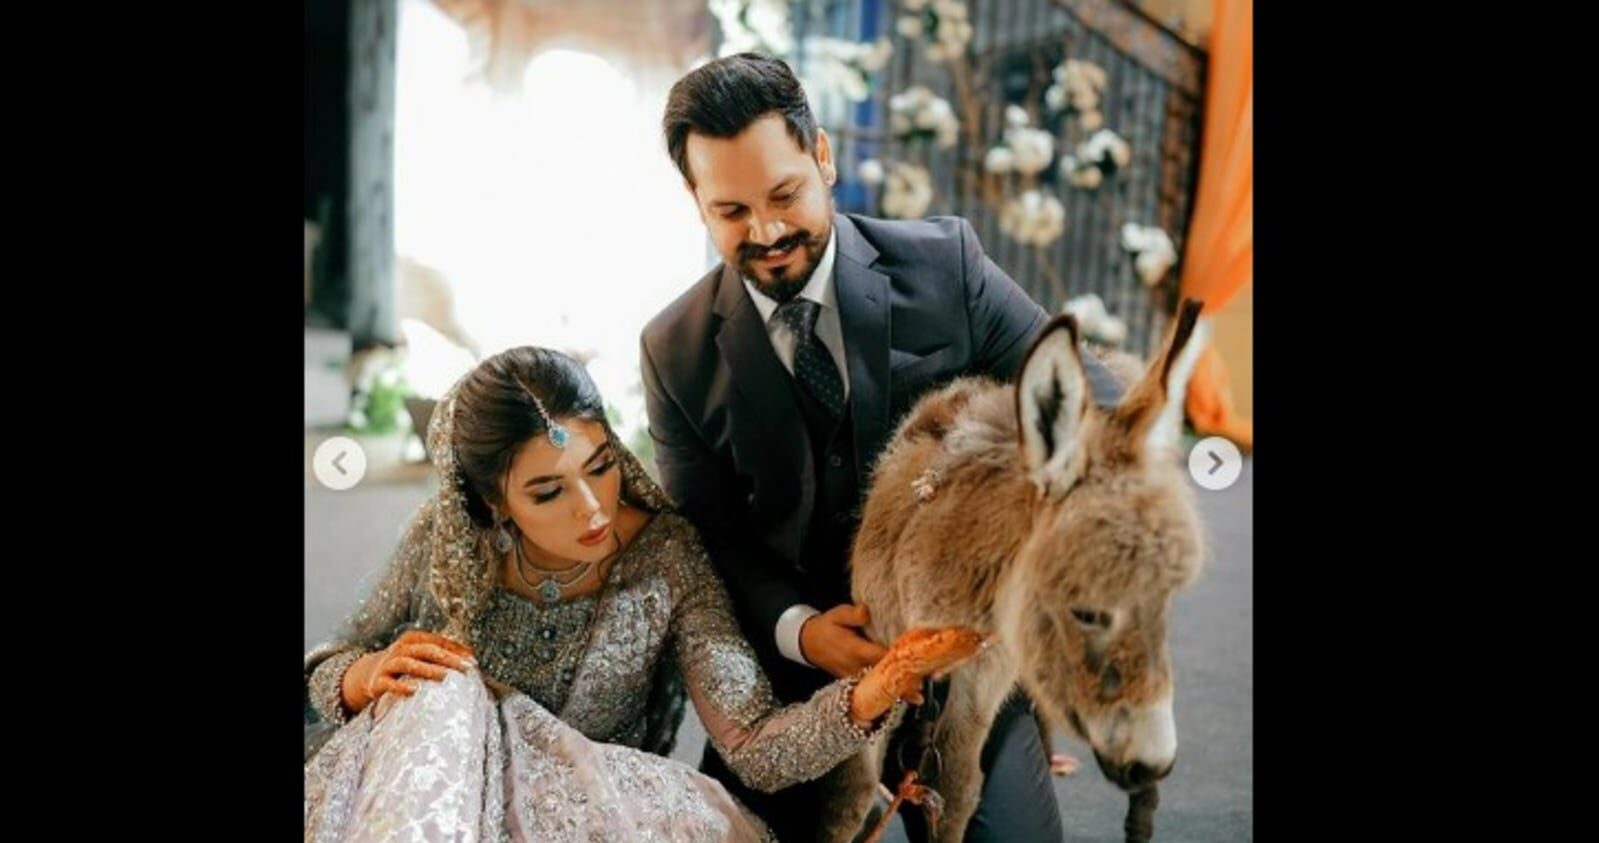 Pakistani groom gifts his bride a donkey, the reason will melt your heart